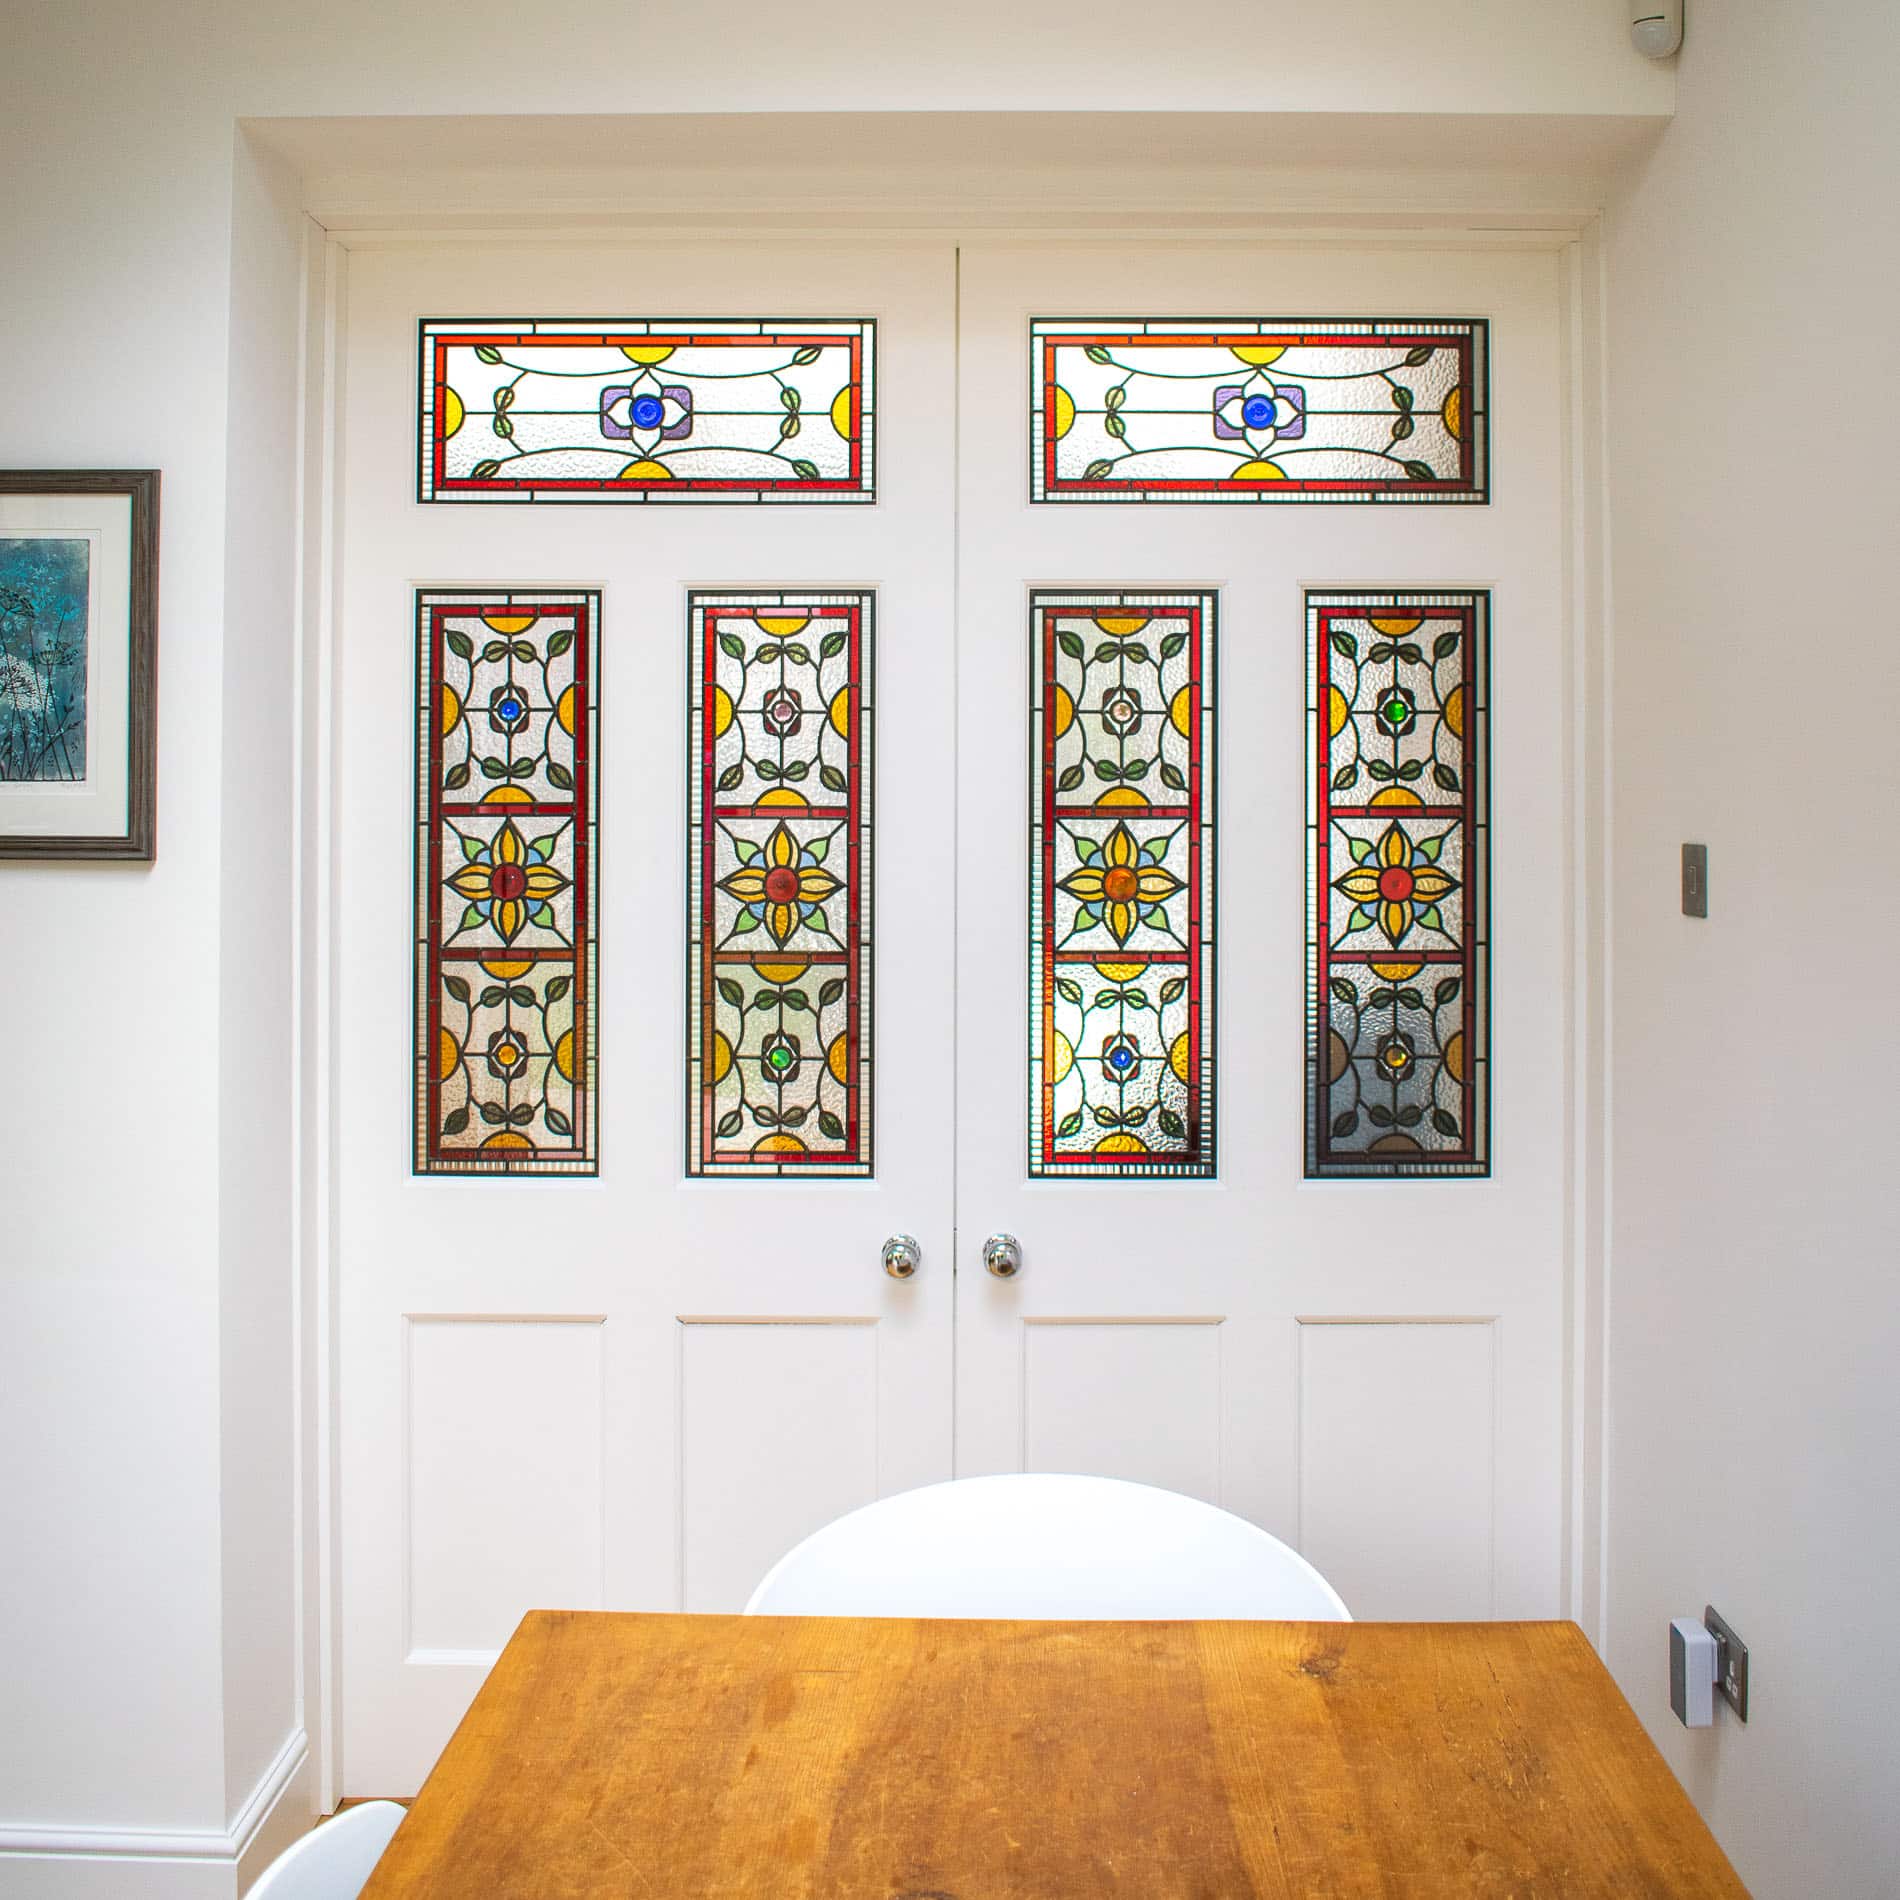 bespoke internal doors. Bespoke pair of Edwardian internal doors with stained glass fitted in a london home